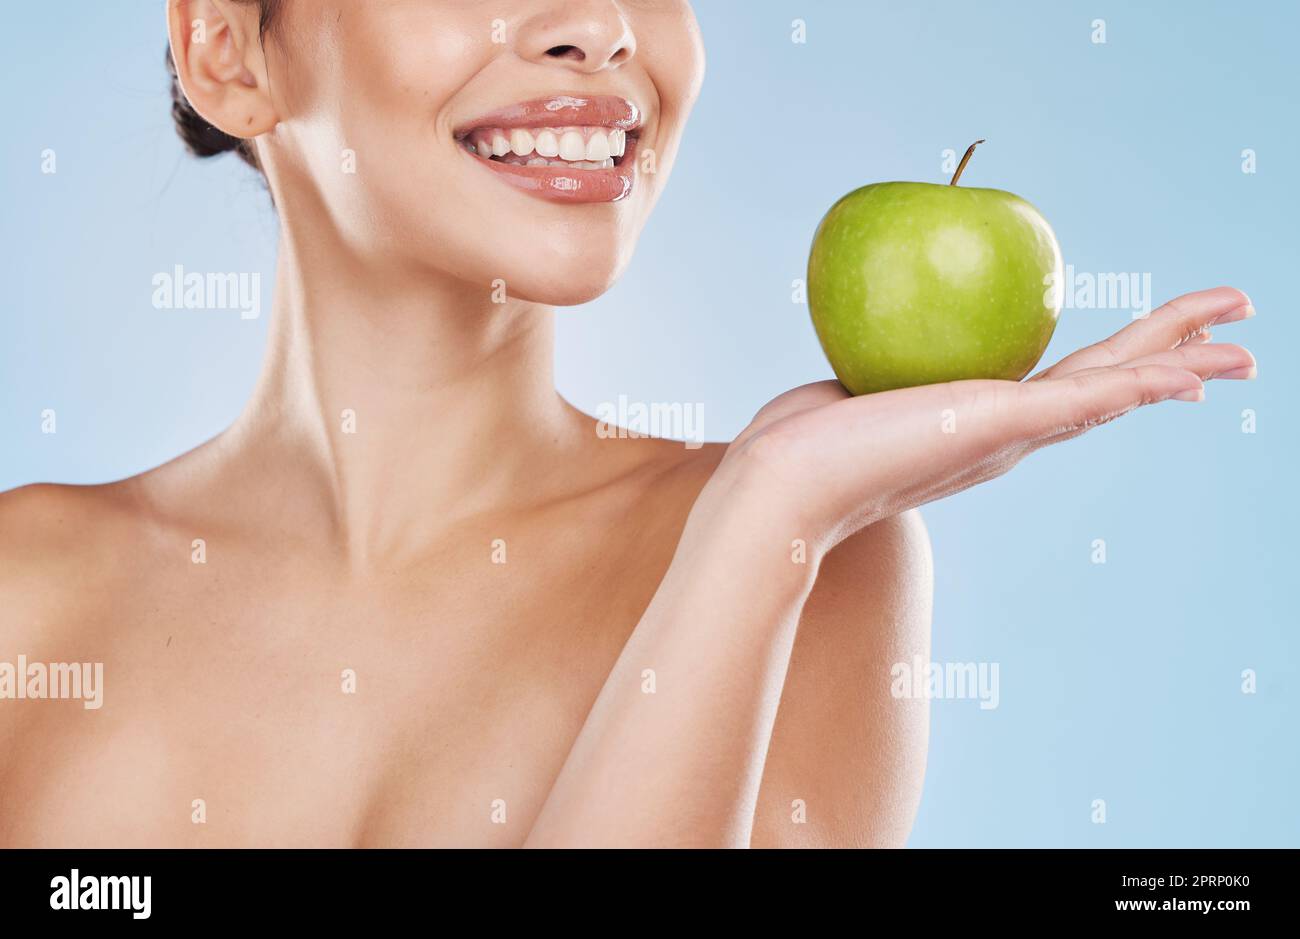 Health, beauty and woman with an apple and a wellness, healthy and organic lifestyle in studio. Girl with clear skin and fresh skincare routine holding a fruit with vitamins and nutrition for a diet. Stock Photo